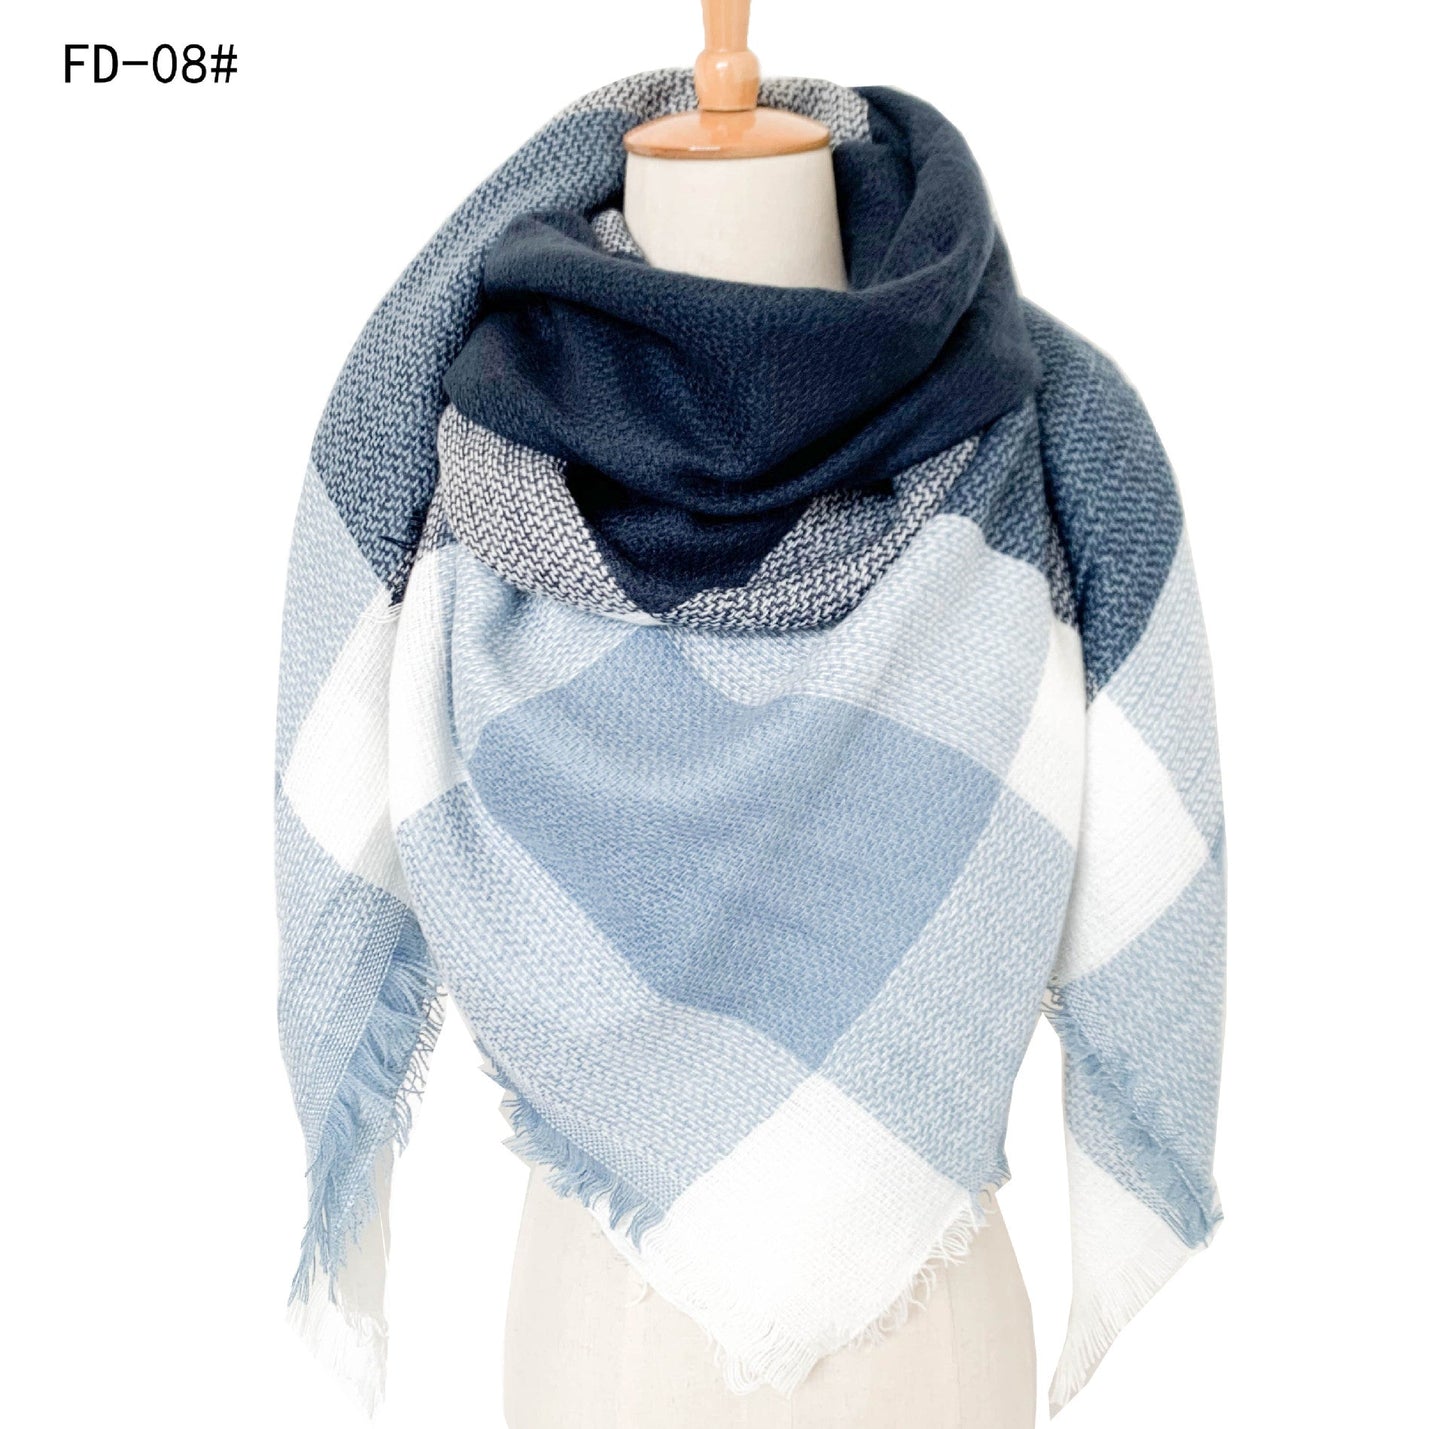 Winter Warm Plaid Scarves for Women-Scarves & Shawls-Navy Blue-140cm-Free Shipping Leatheretro